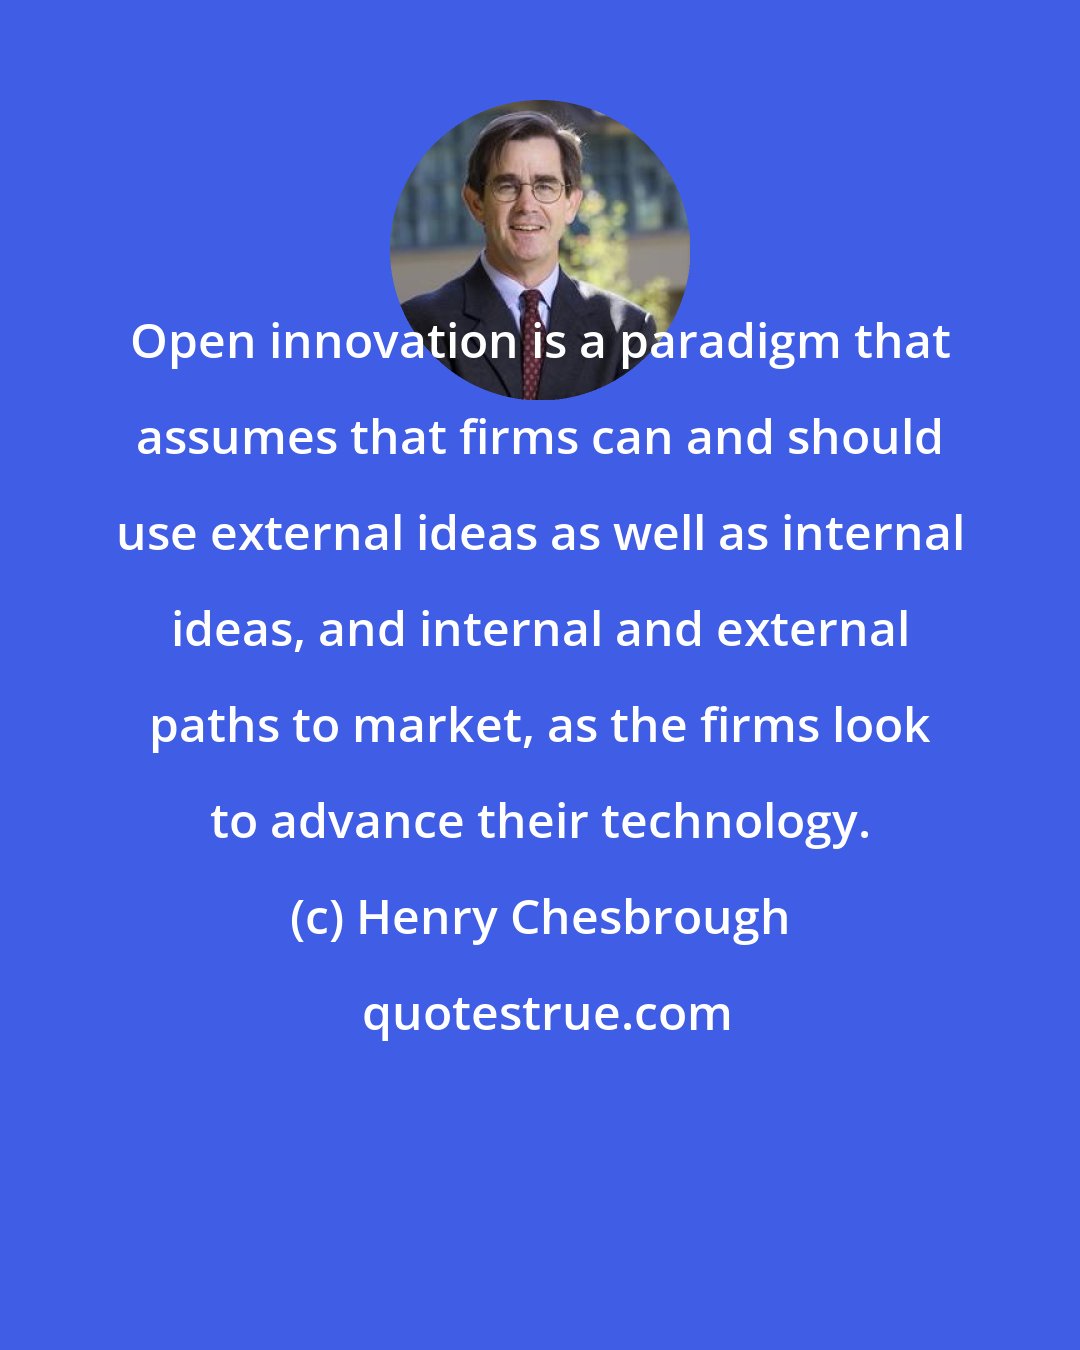 Henry Chesbrough: Open innovation is a paradigm that assumes that firms can and should use external ideas as well as internal ideas, and internal and external paths to market, as the firms look to advance their technology.